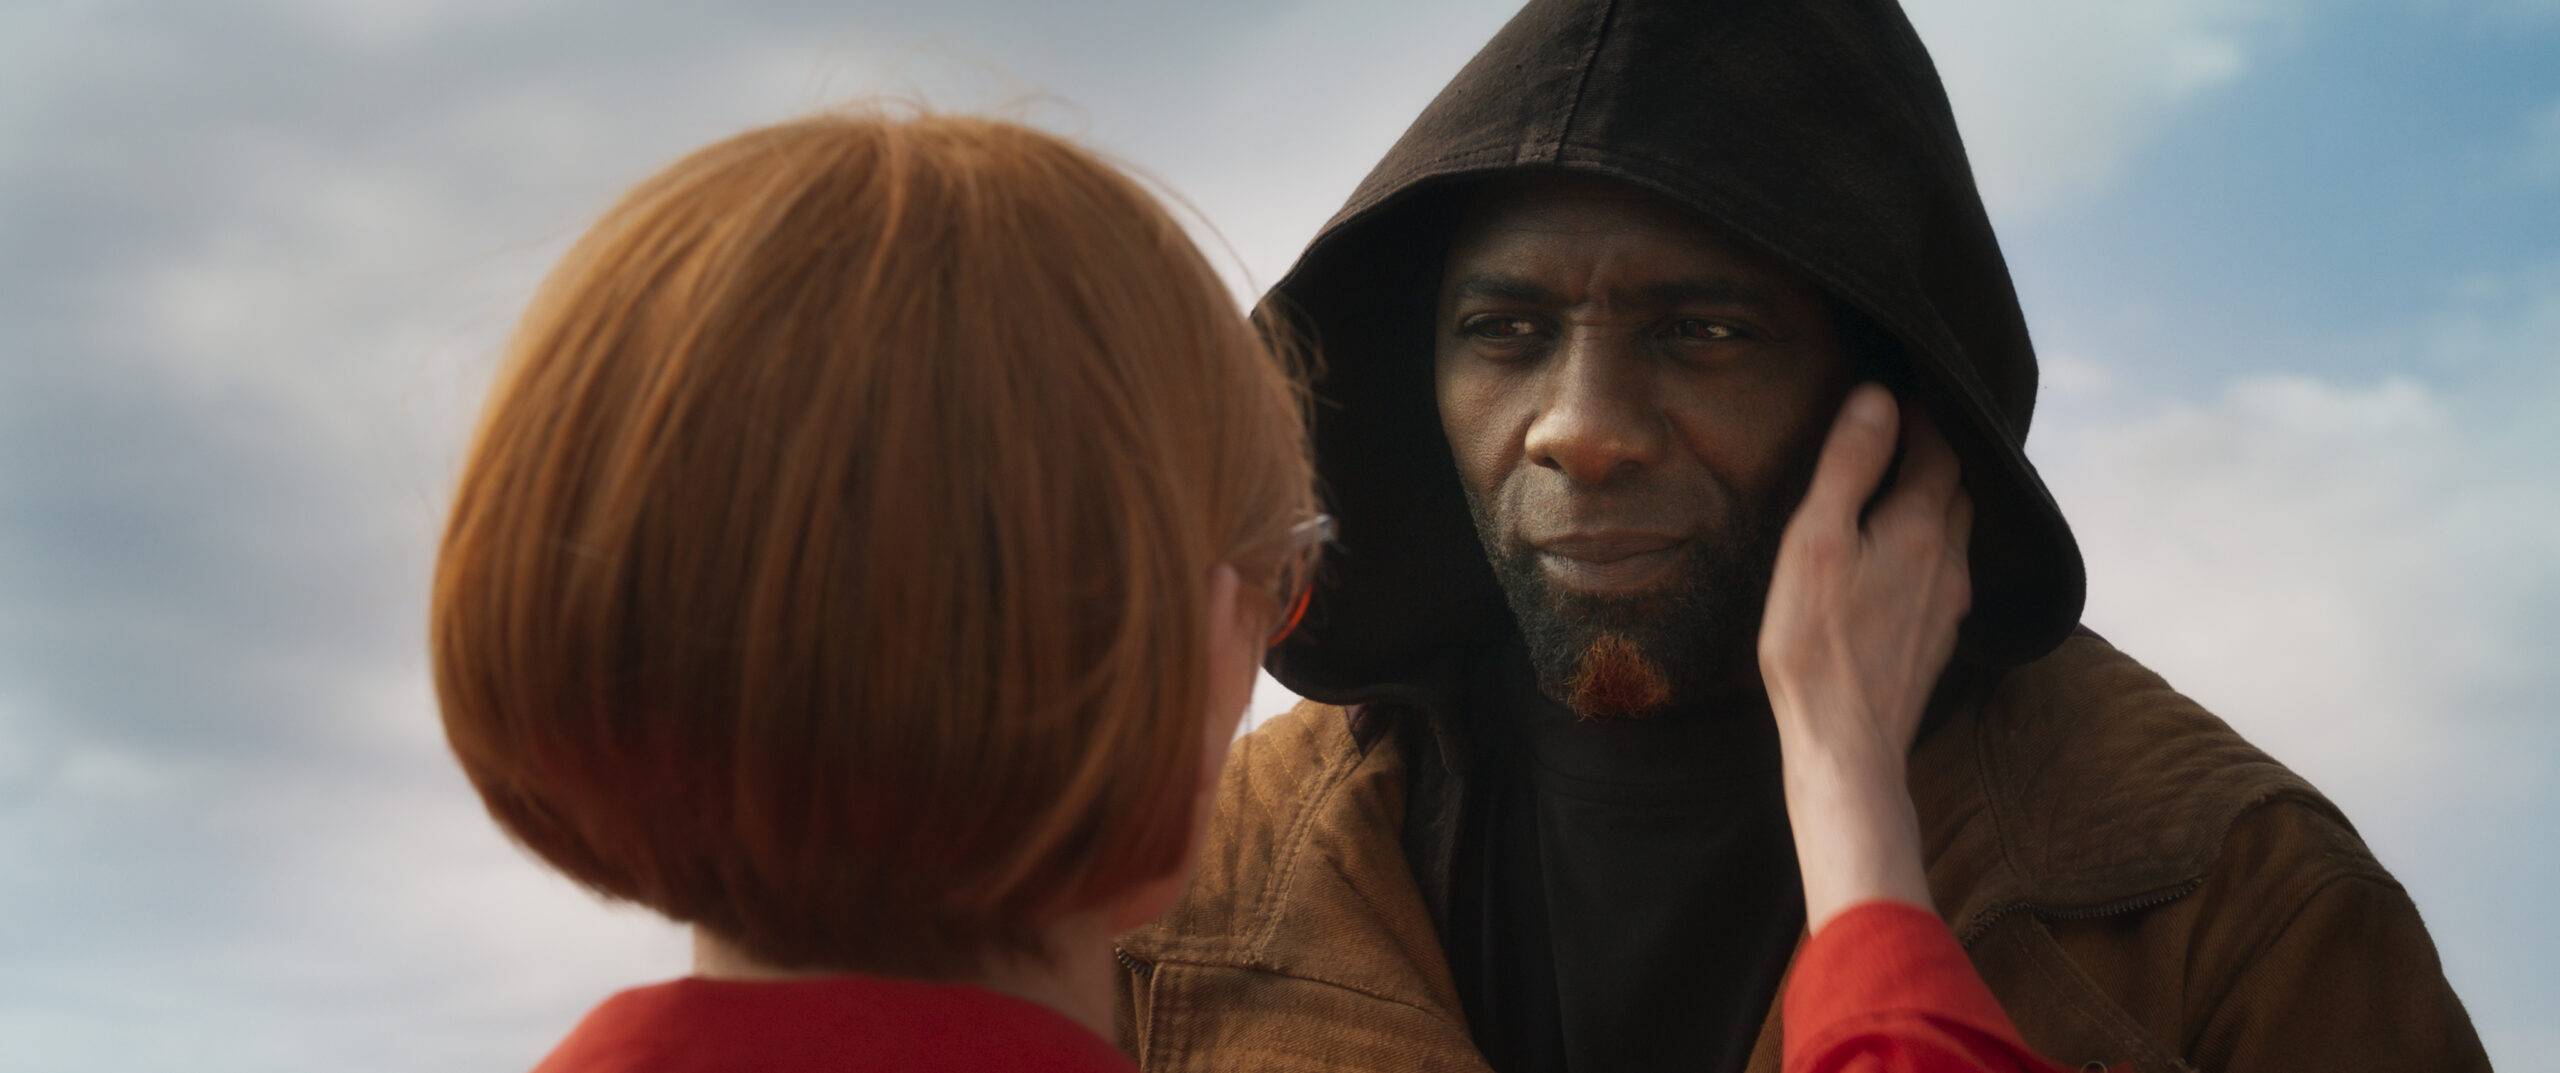 A still from "Three Thousand Years of Longing" showing Tilda Swinton from behind reaching up to cup Idris Elba's face.